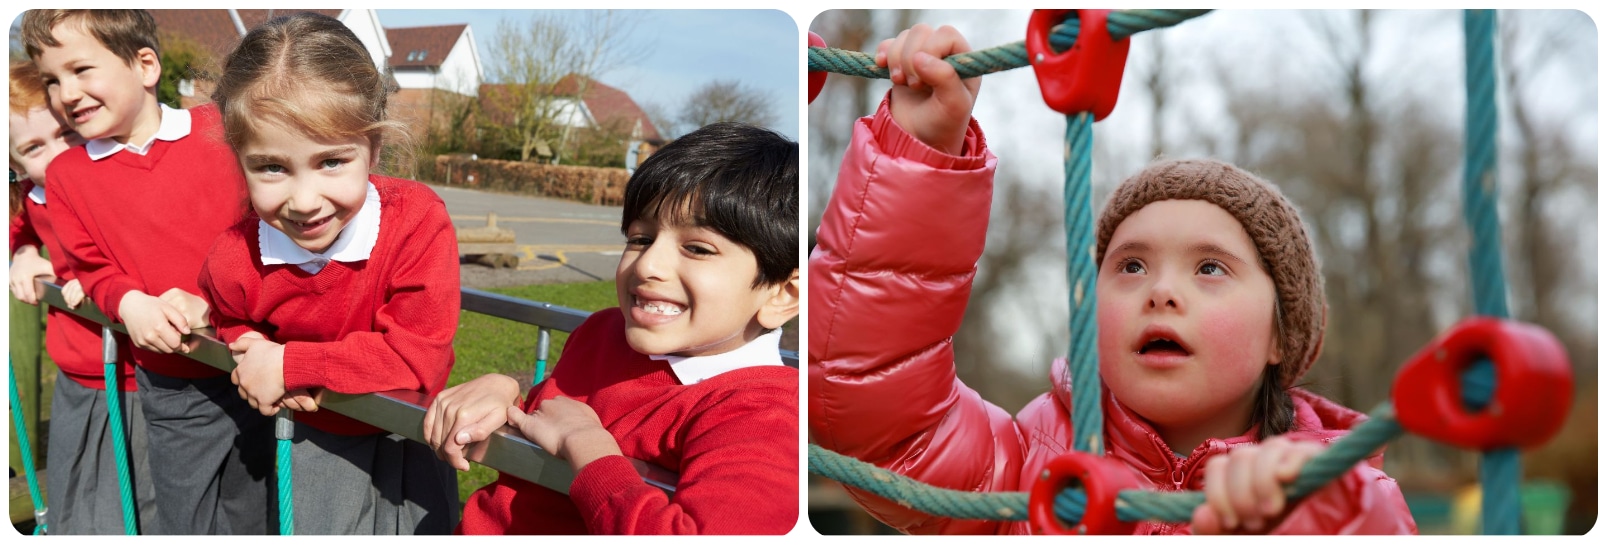 Two pics, one of children on a clatterbridge, one of a girl climbing a rope net